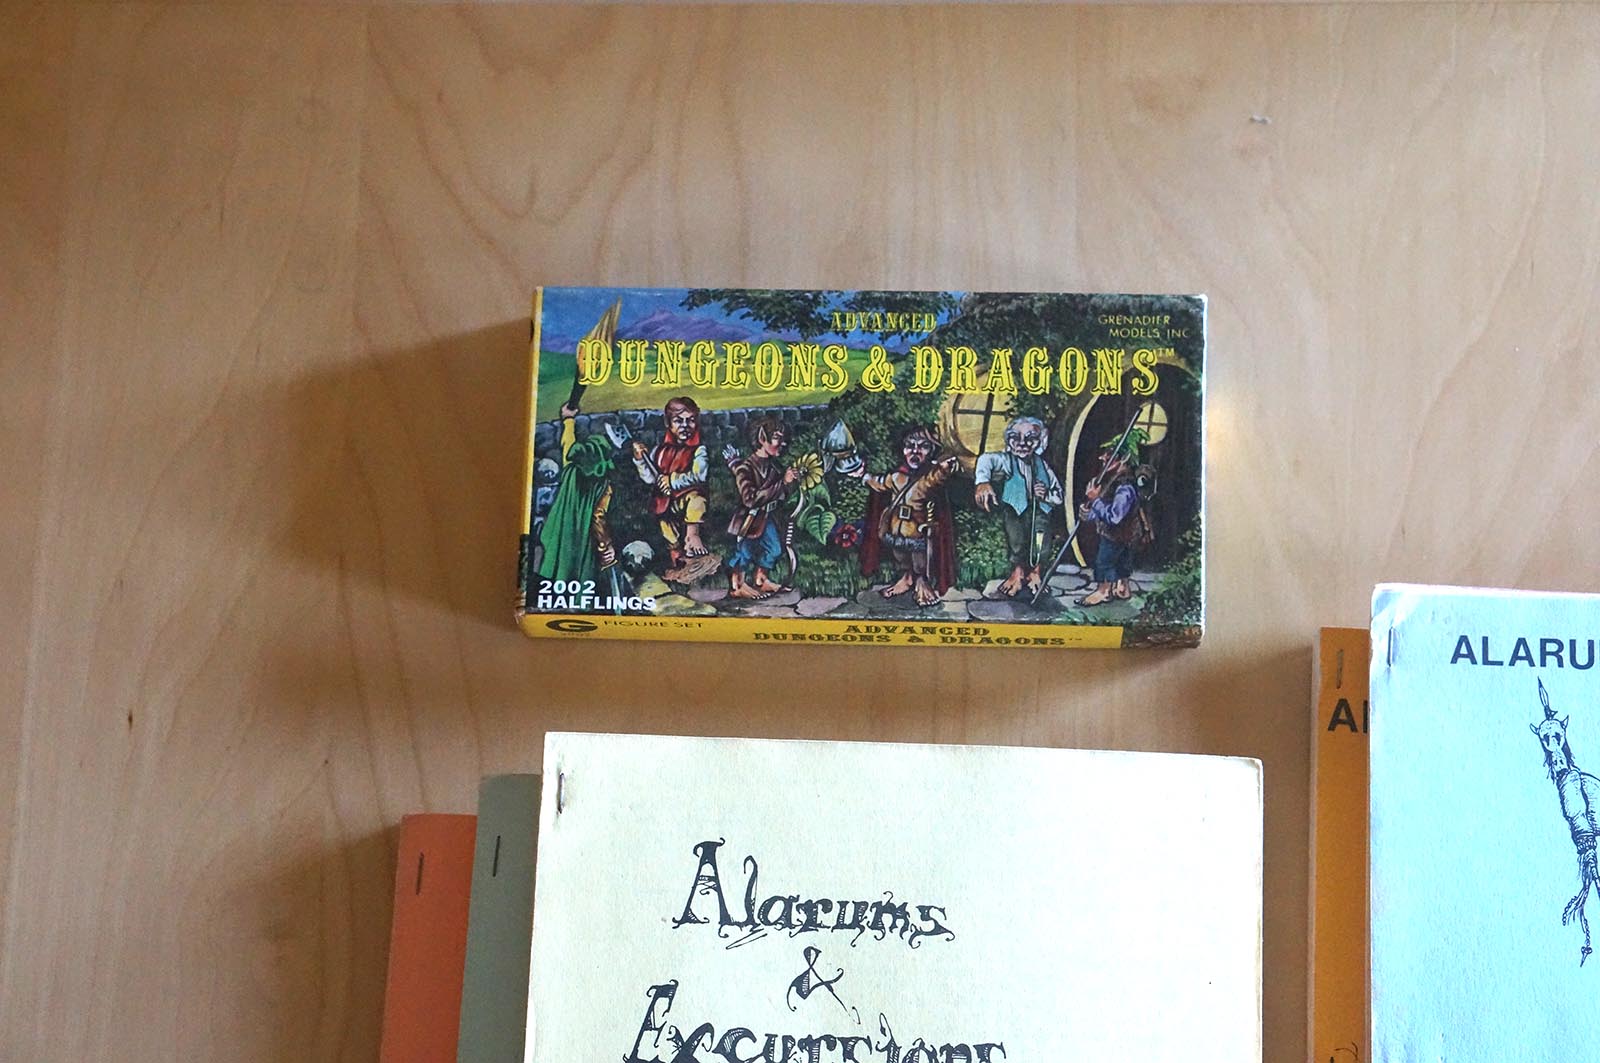 Dungeons & Dragons - Alarums and Excursions